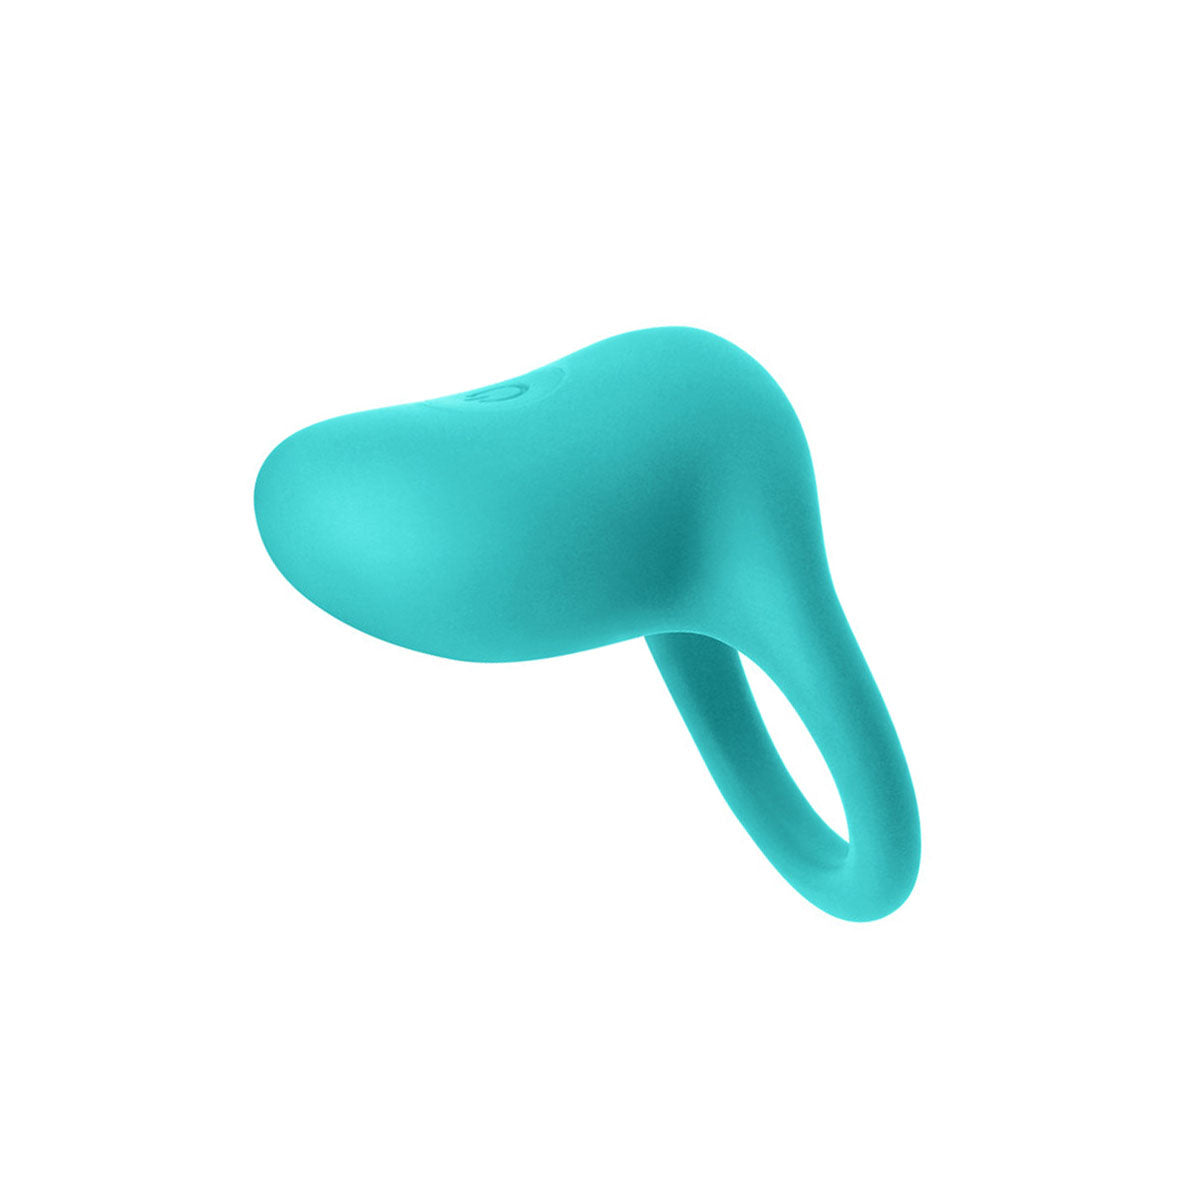 Teal silicone vibrating ring with flat head Nudie Co